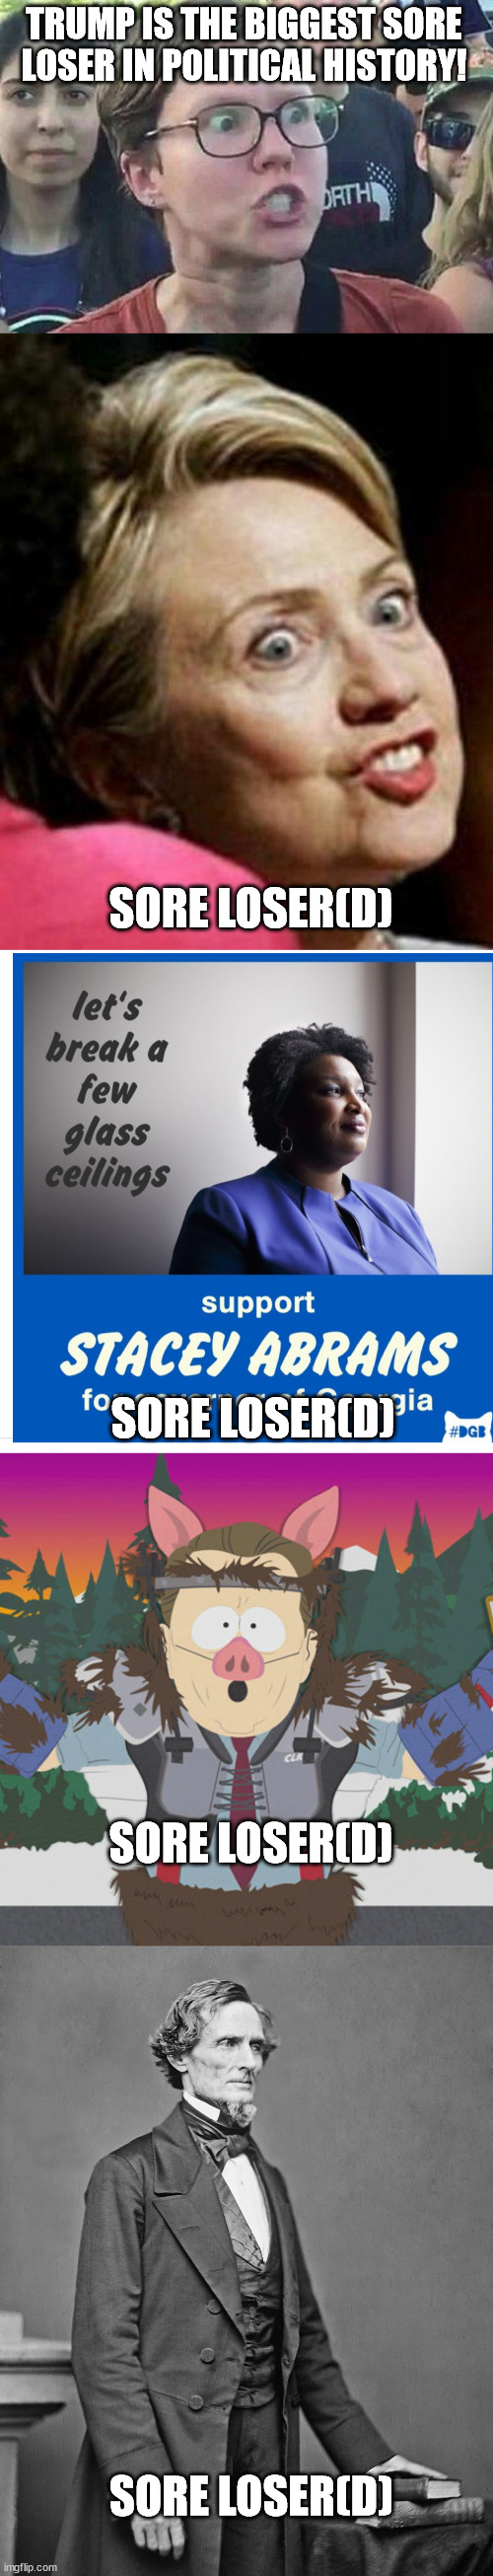 And one of those sore losers triggered the frickin' US Civil War partly because he lost. | TRUMP IS THE BIGGEST SORE LOSER IN POLITICAL HISTORY! SORE LOSER(D); SORE LOSER(D); SORE LOSER(D); SORE LOSER(D) | image tagged in triggered liberal,hillary clinton fish,stacy abrams,al gore manbearpig south park,president jefferson davis,political meme | made w/ Imgflip meme maker